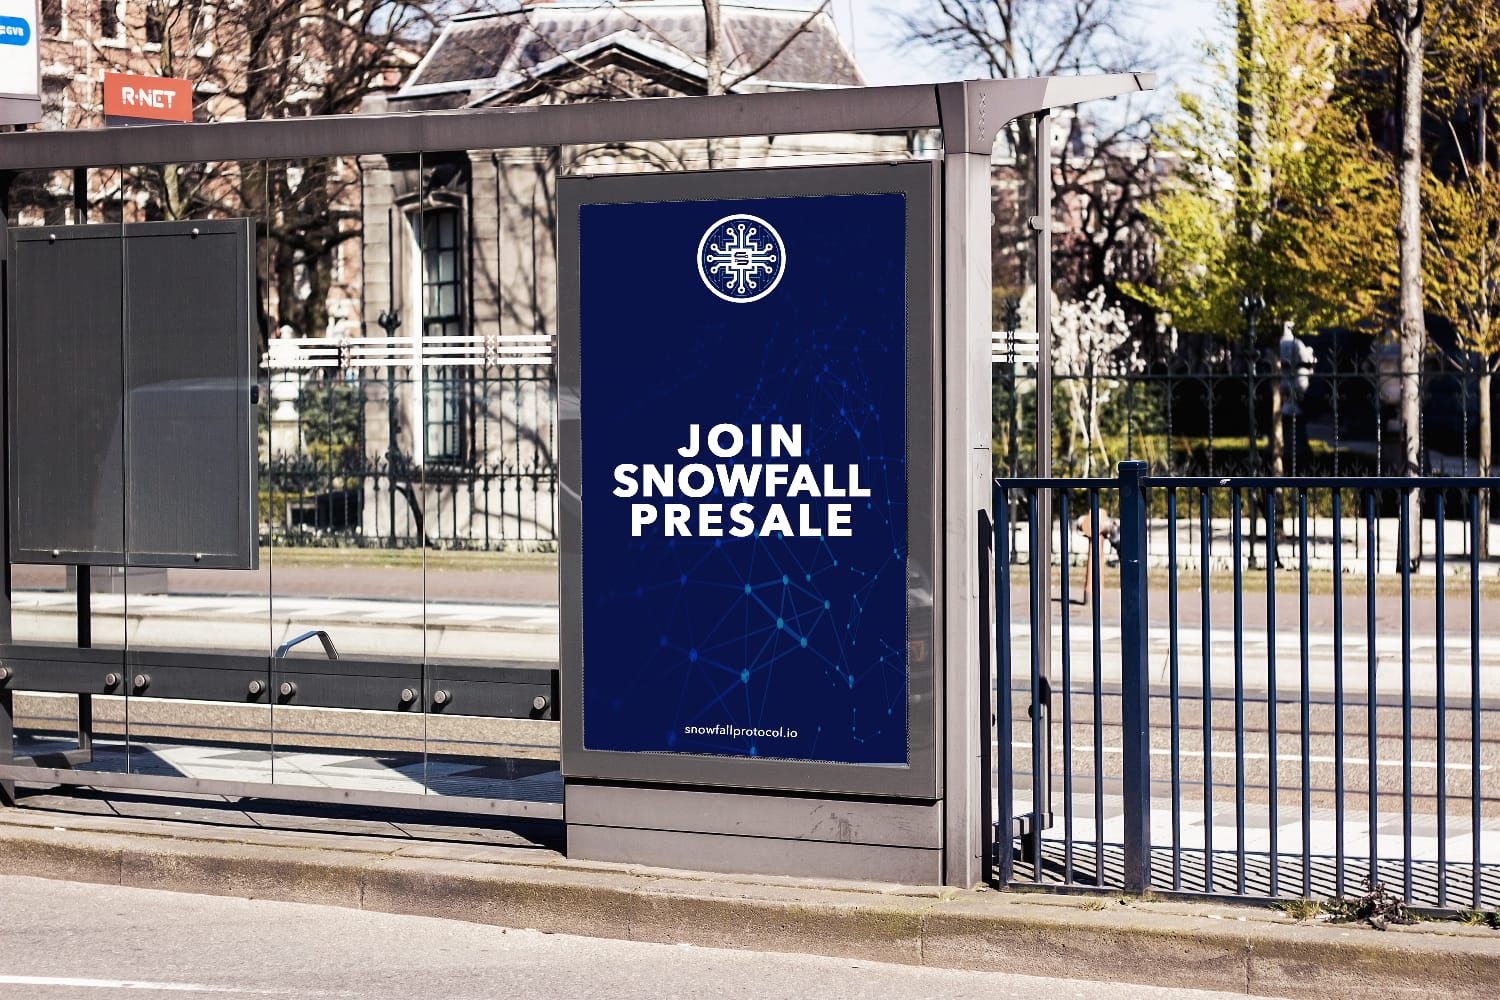 Why Shiba Inu (SHIB) and Dogecoin (DOGE) Investors are Shifting to Snowfall Protocol (SNW)?